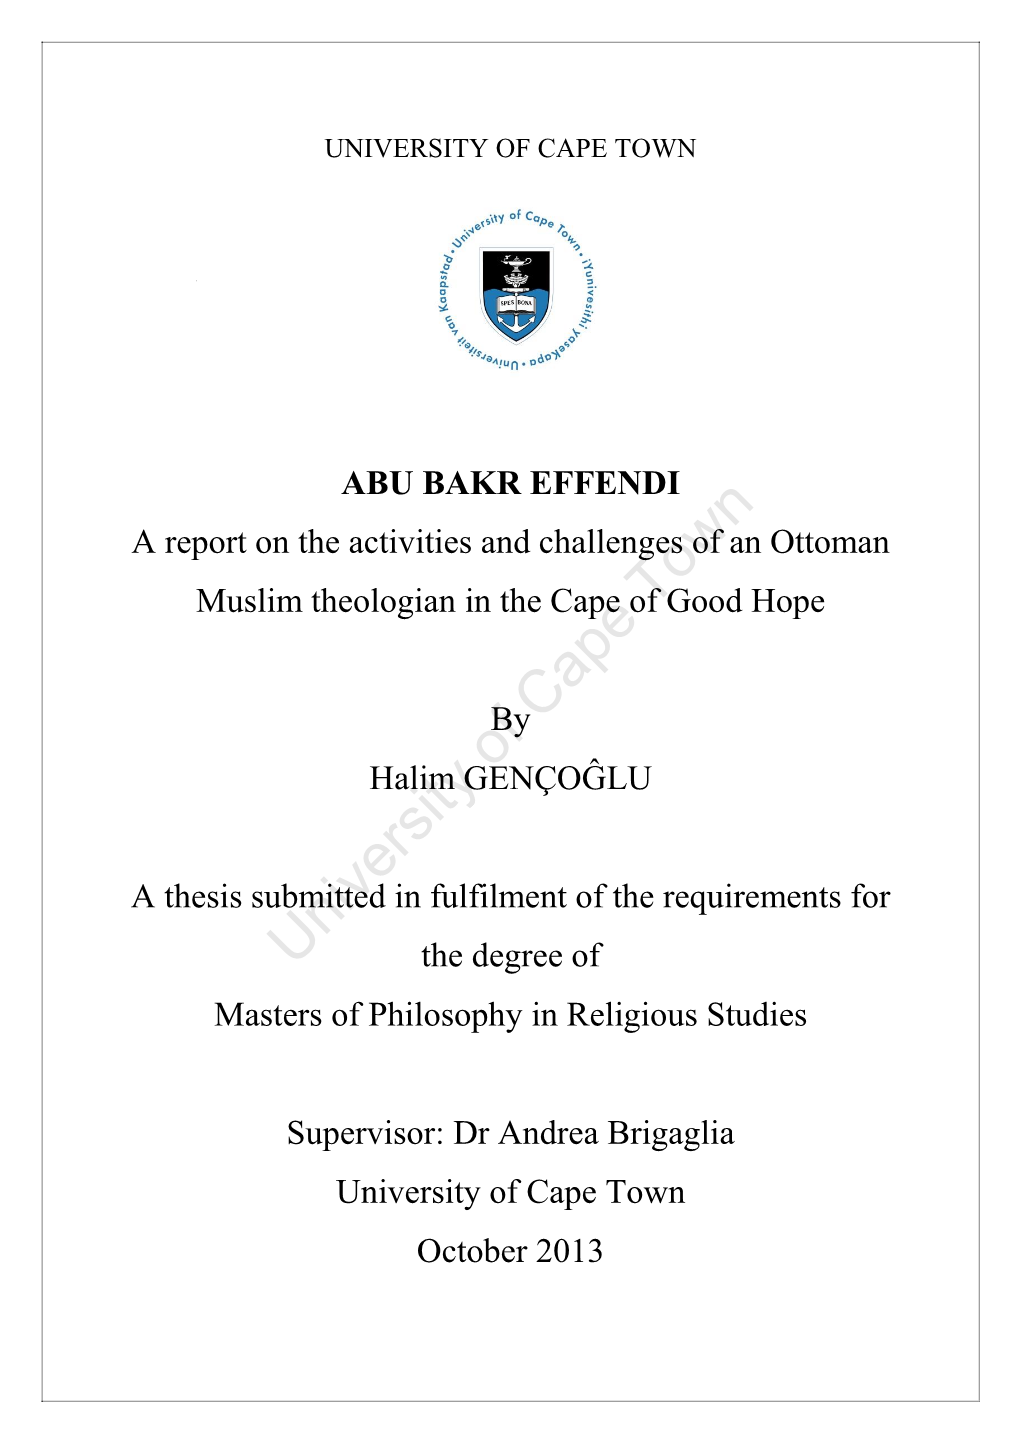 ABU BAKR EFFENDI a Report on the Activities and Challenges of an Ottoman Muslim Theologian in the Cape Oftown Good Hope